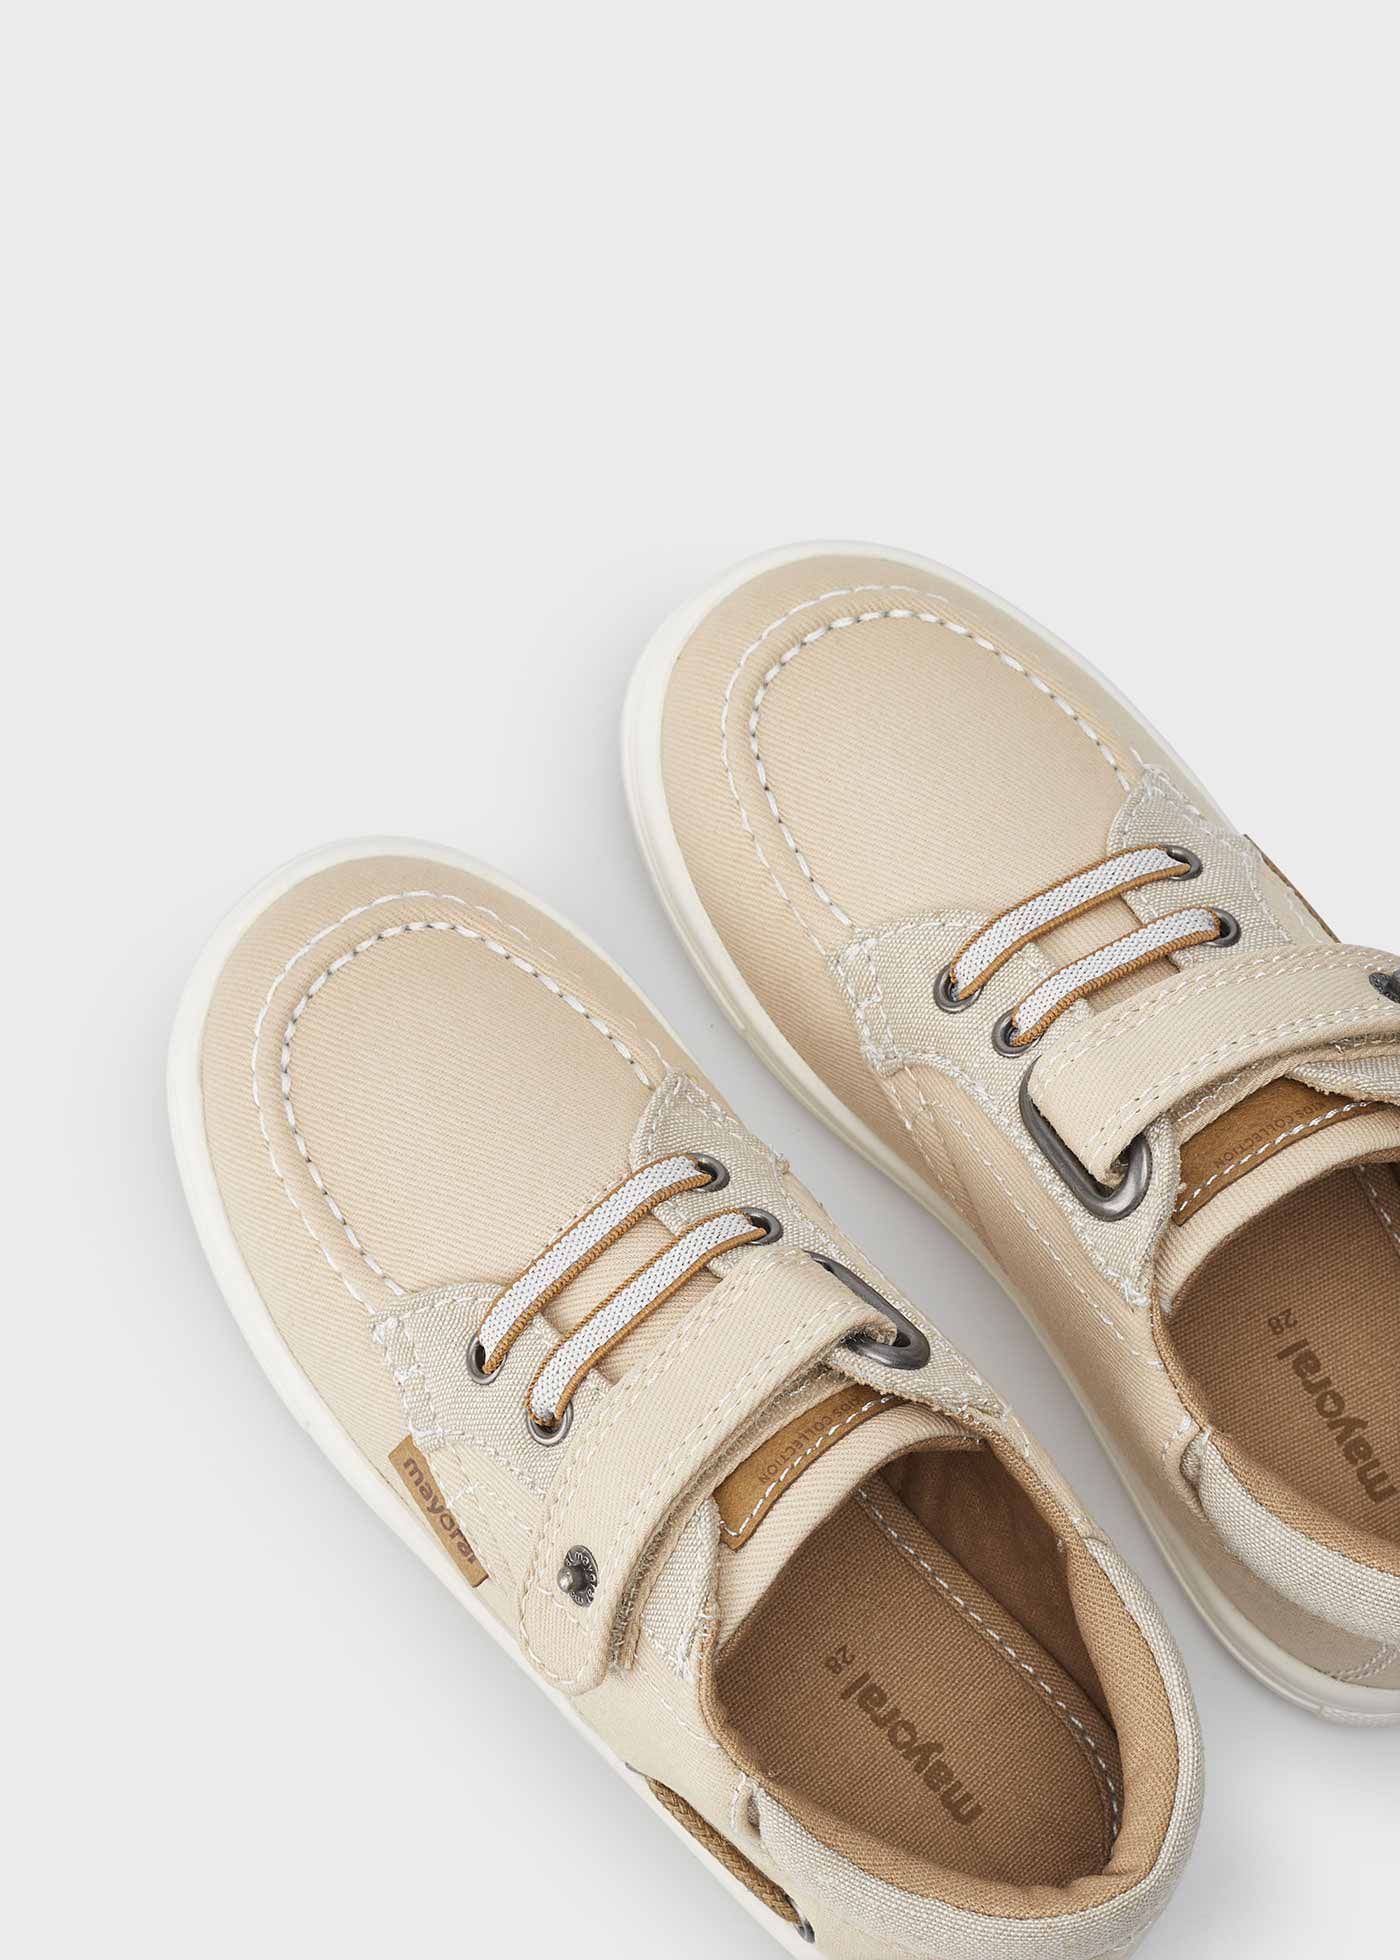 Boys boat shoes